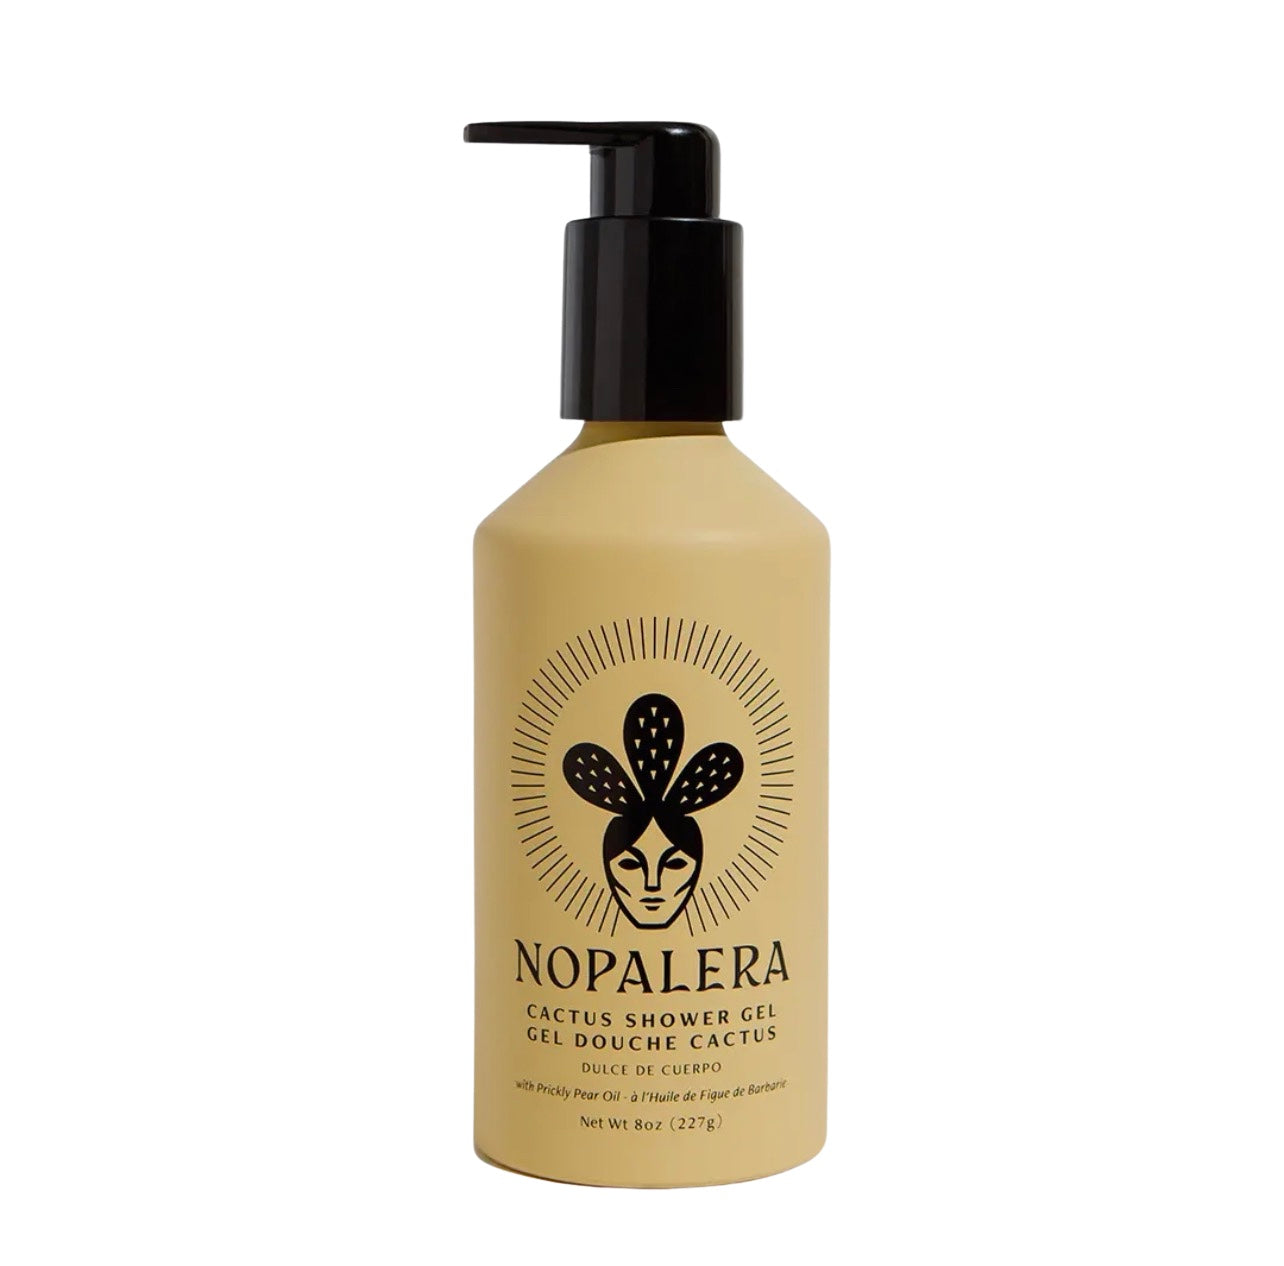 8 oz bottle of cactus shower gel featuring a beige colored bottle with the signature Nopalera logo of a women wearing a cactus crown